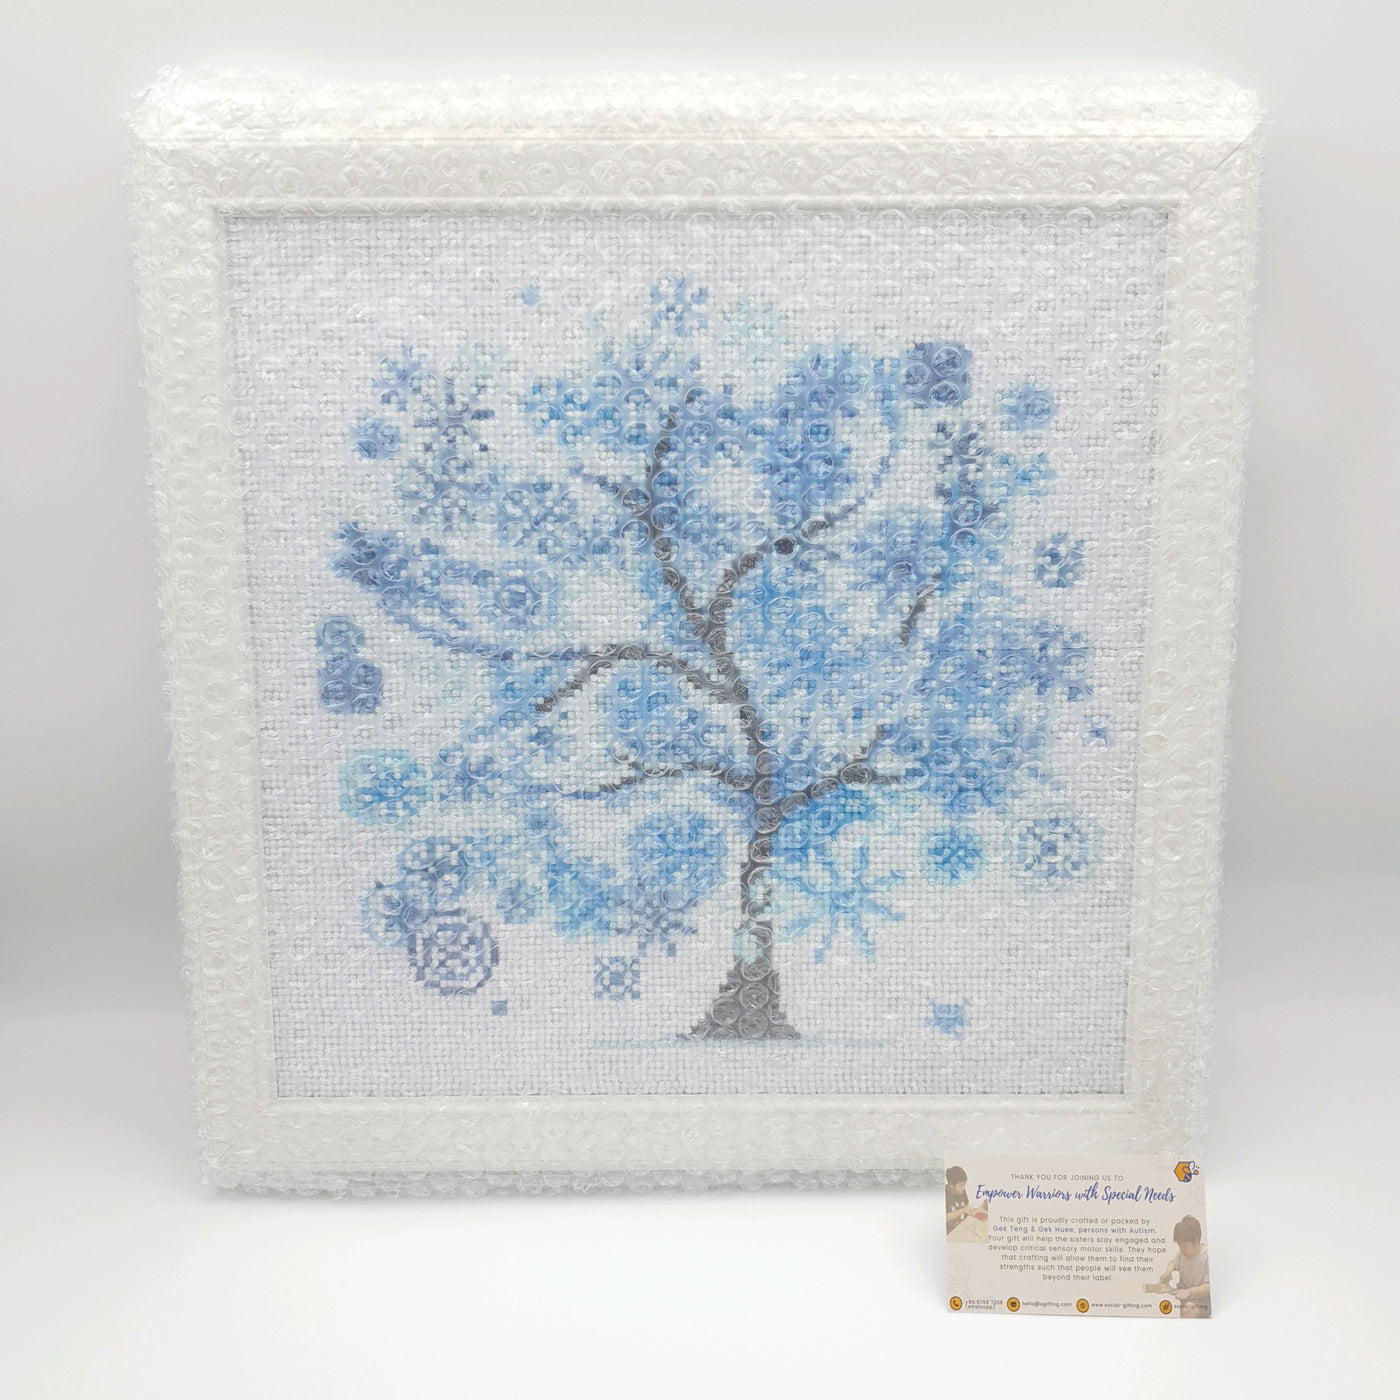 Trees in the Seasons Diamond Art with White Frame